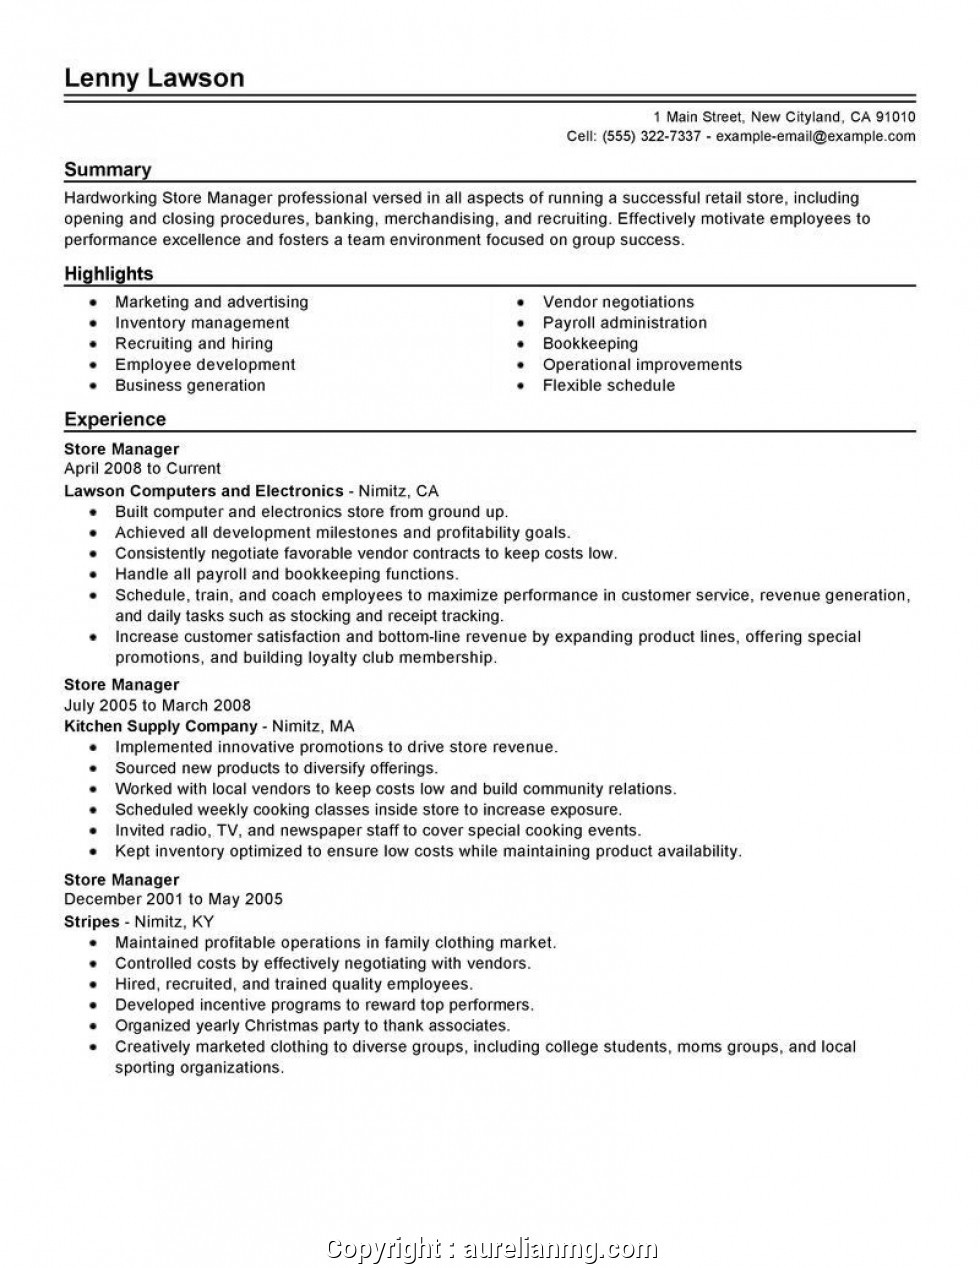 sample resume for grocery store baggerml